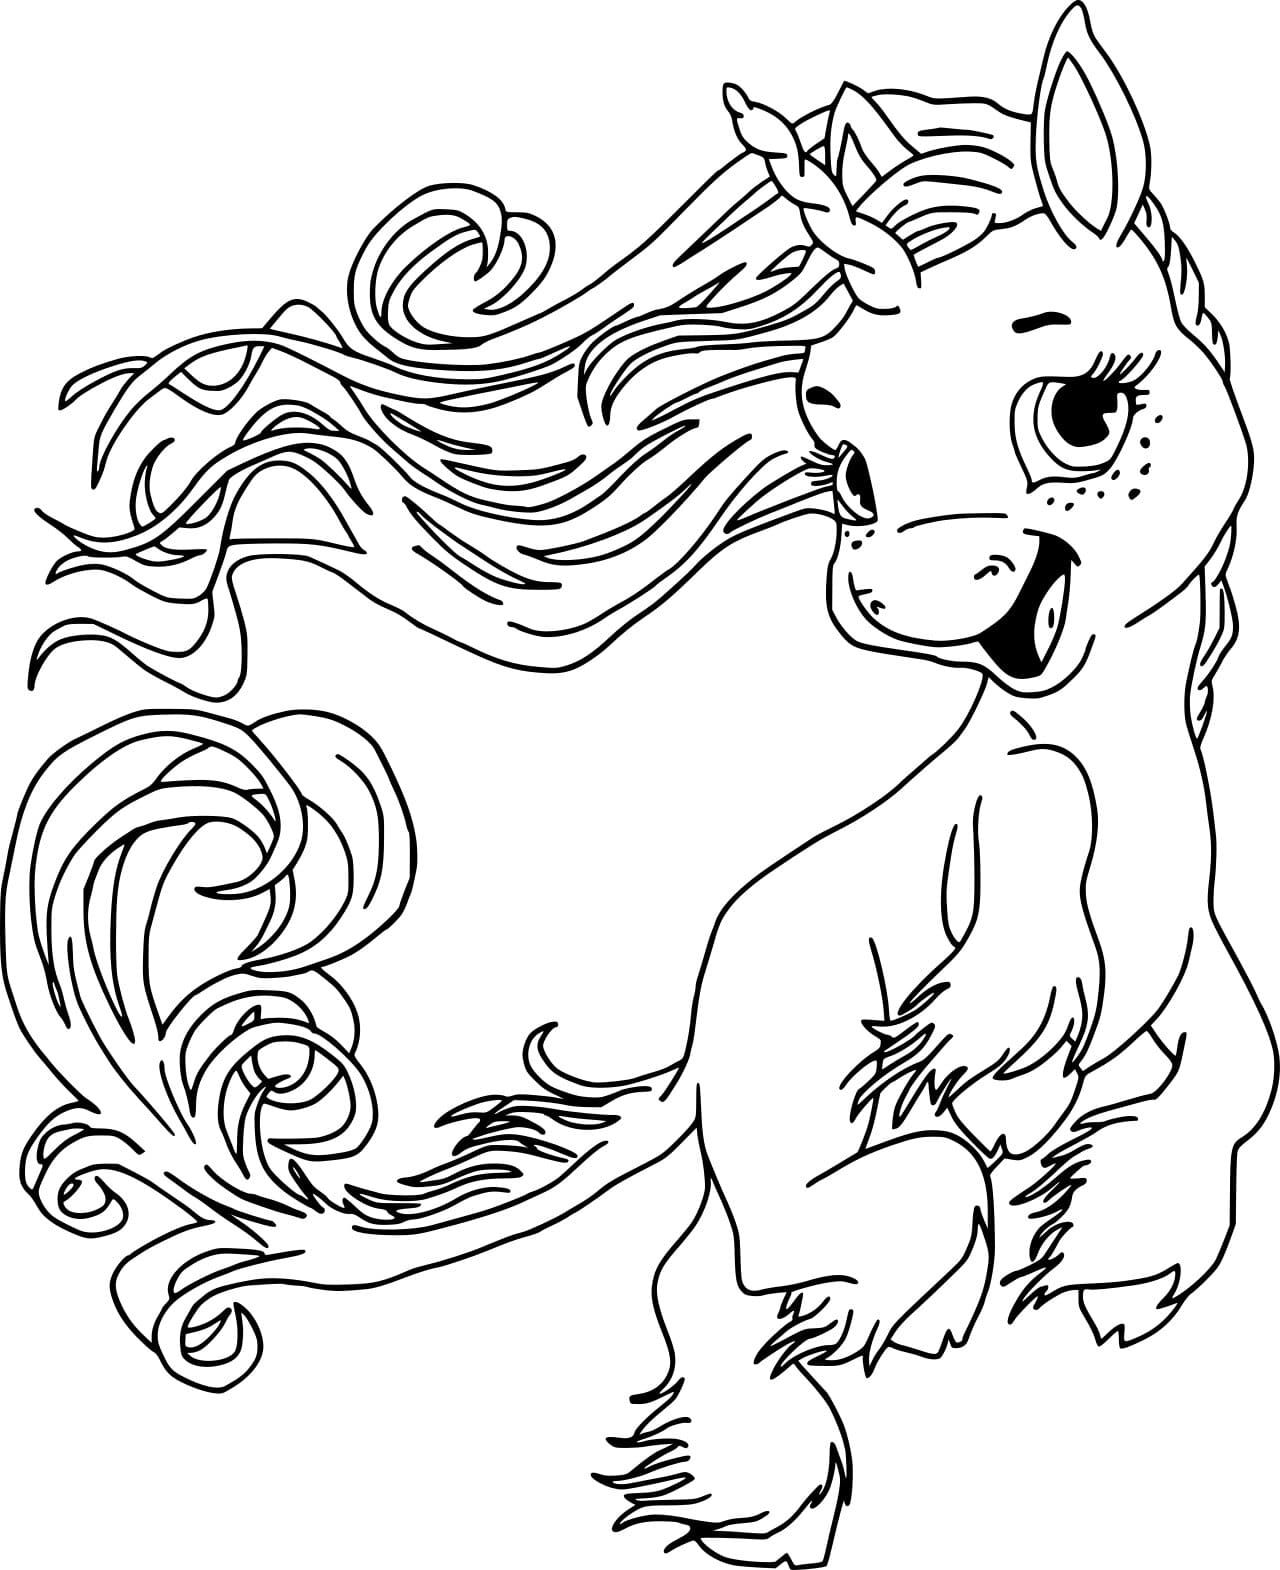 Funny unicorn coloring pages